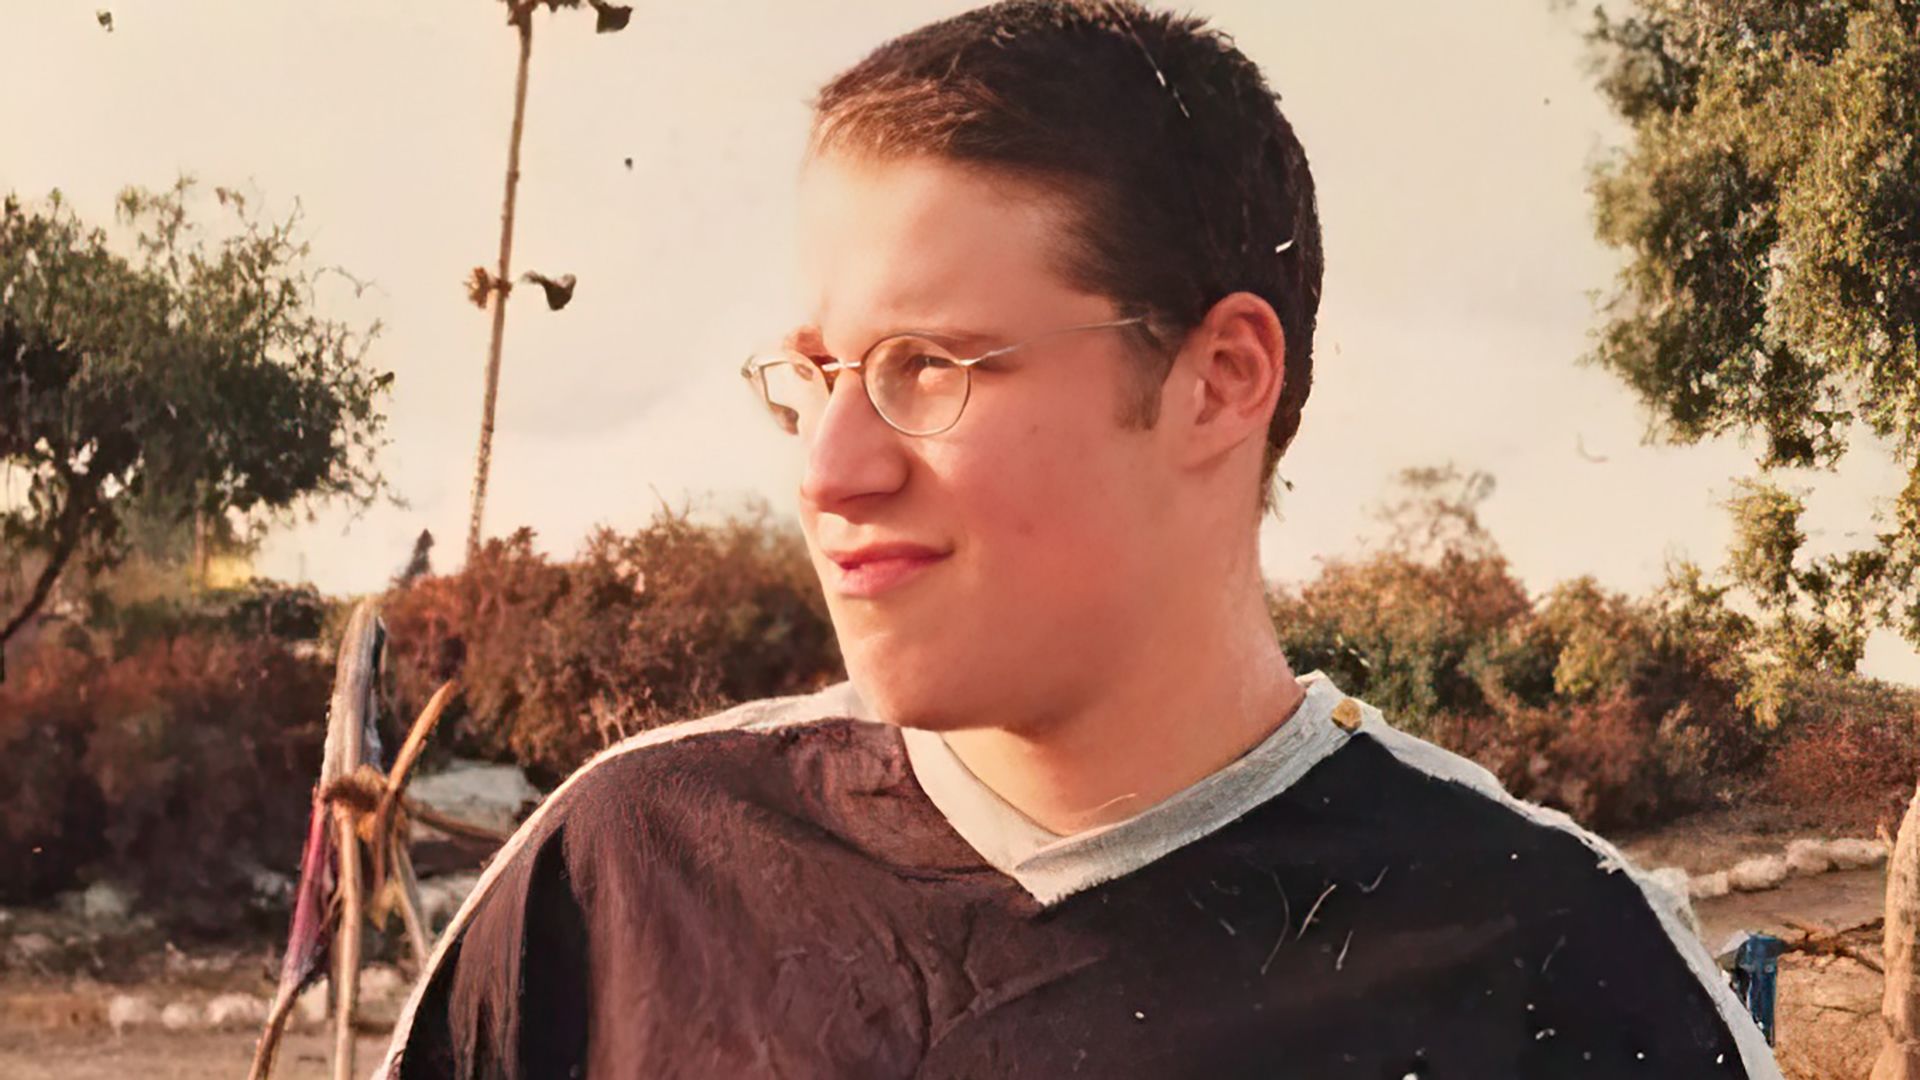 Seth Rogen at the age of 16